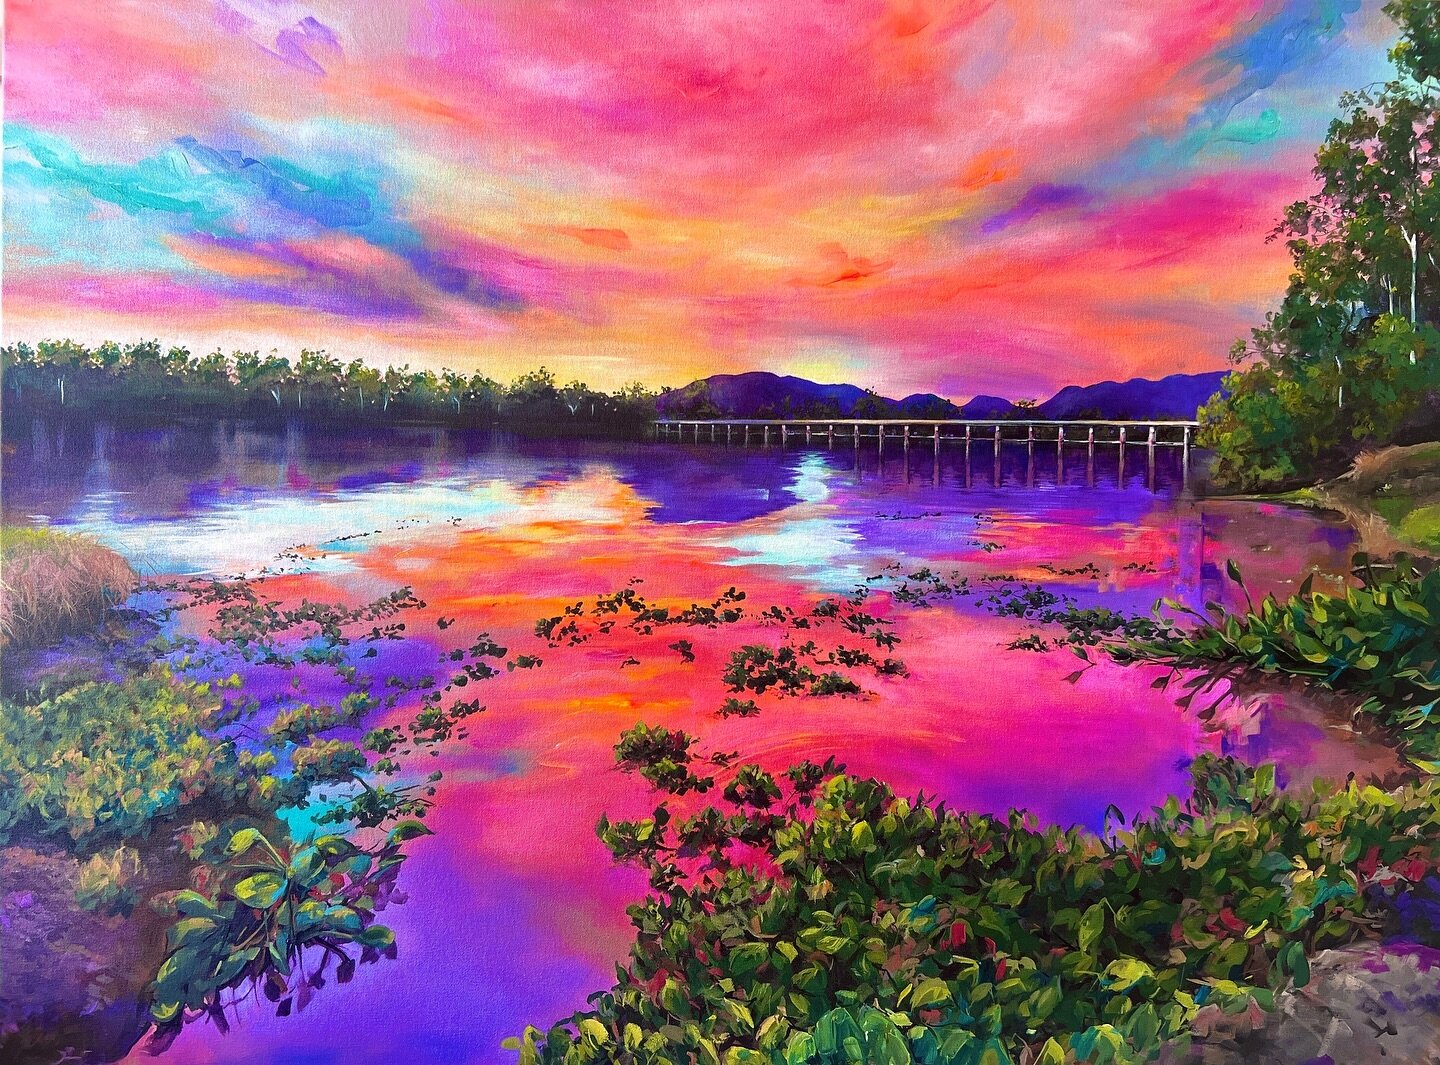 💜The View💜 

My latest commission. I love painting reflective water, I can go nuts with dramatic colours. 🤩💃

#lovecolors #paintingoftheday #colourfullandscape #commissionart #ruthchaplainart #australian #australianlandscape #rockhampton #river #